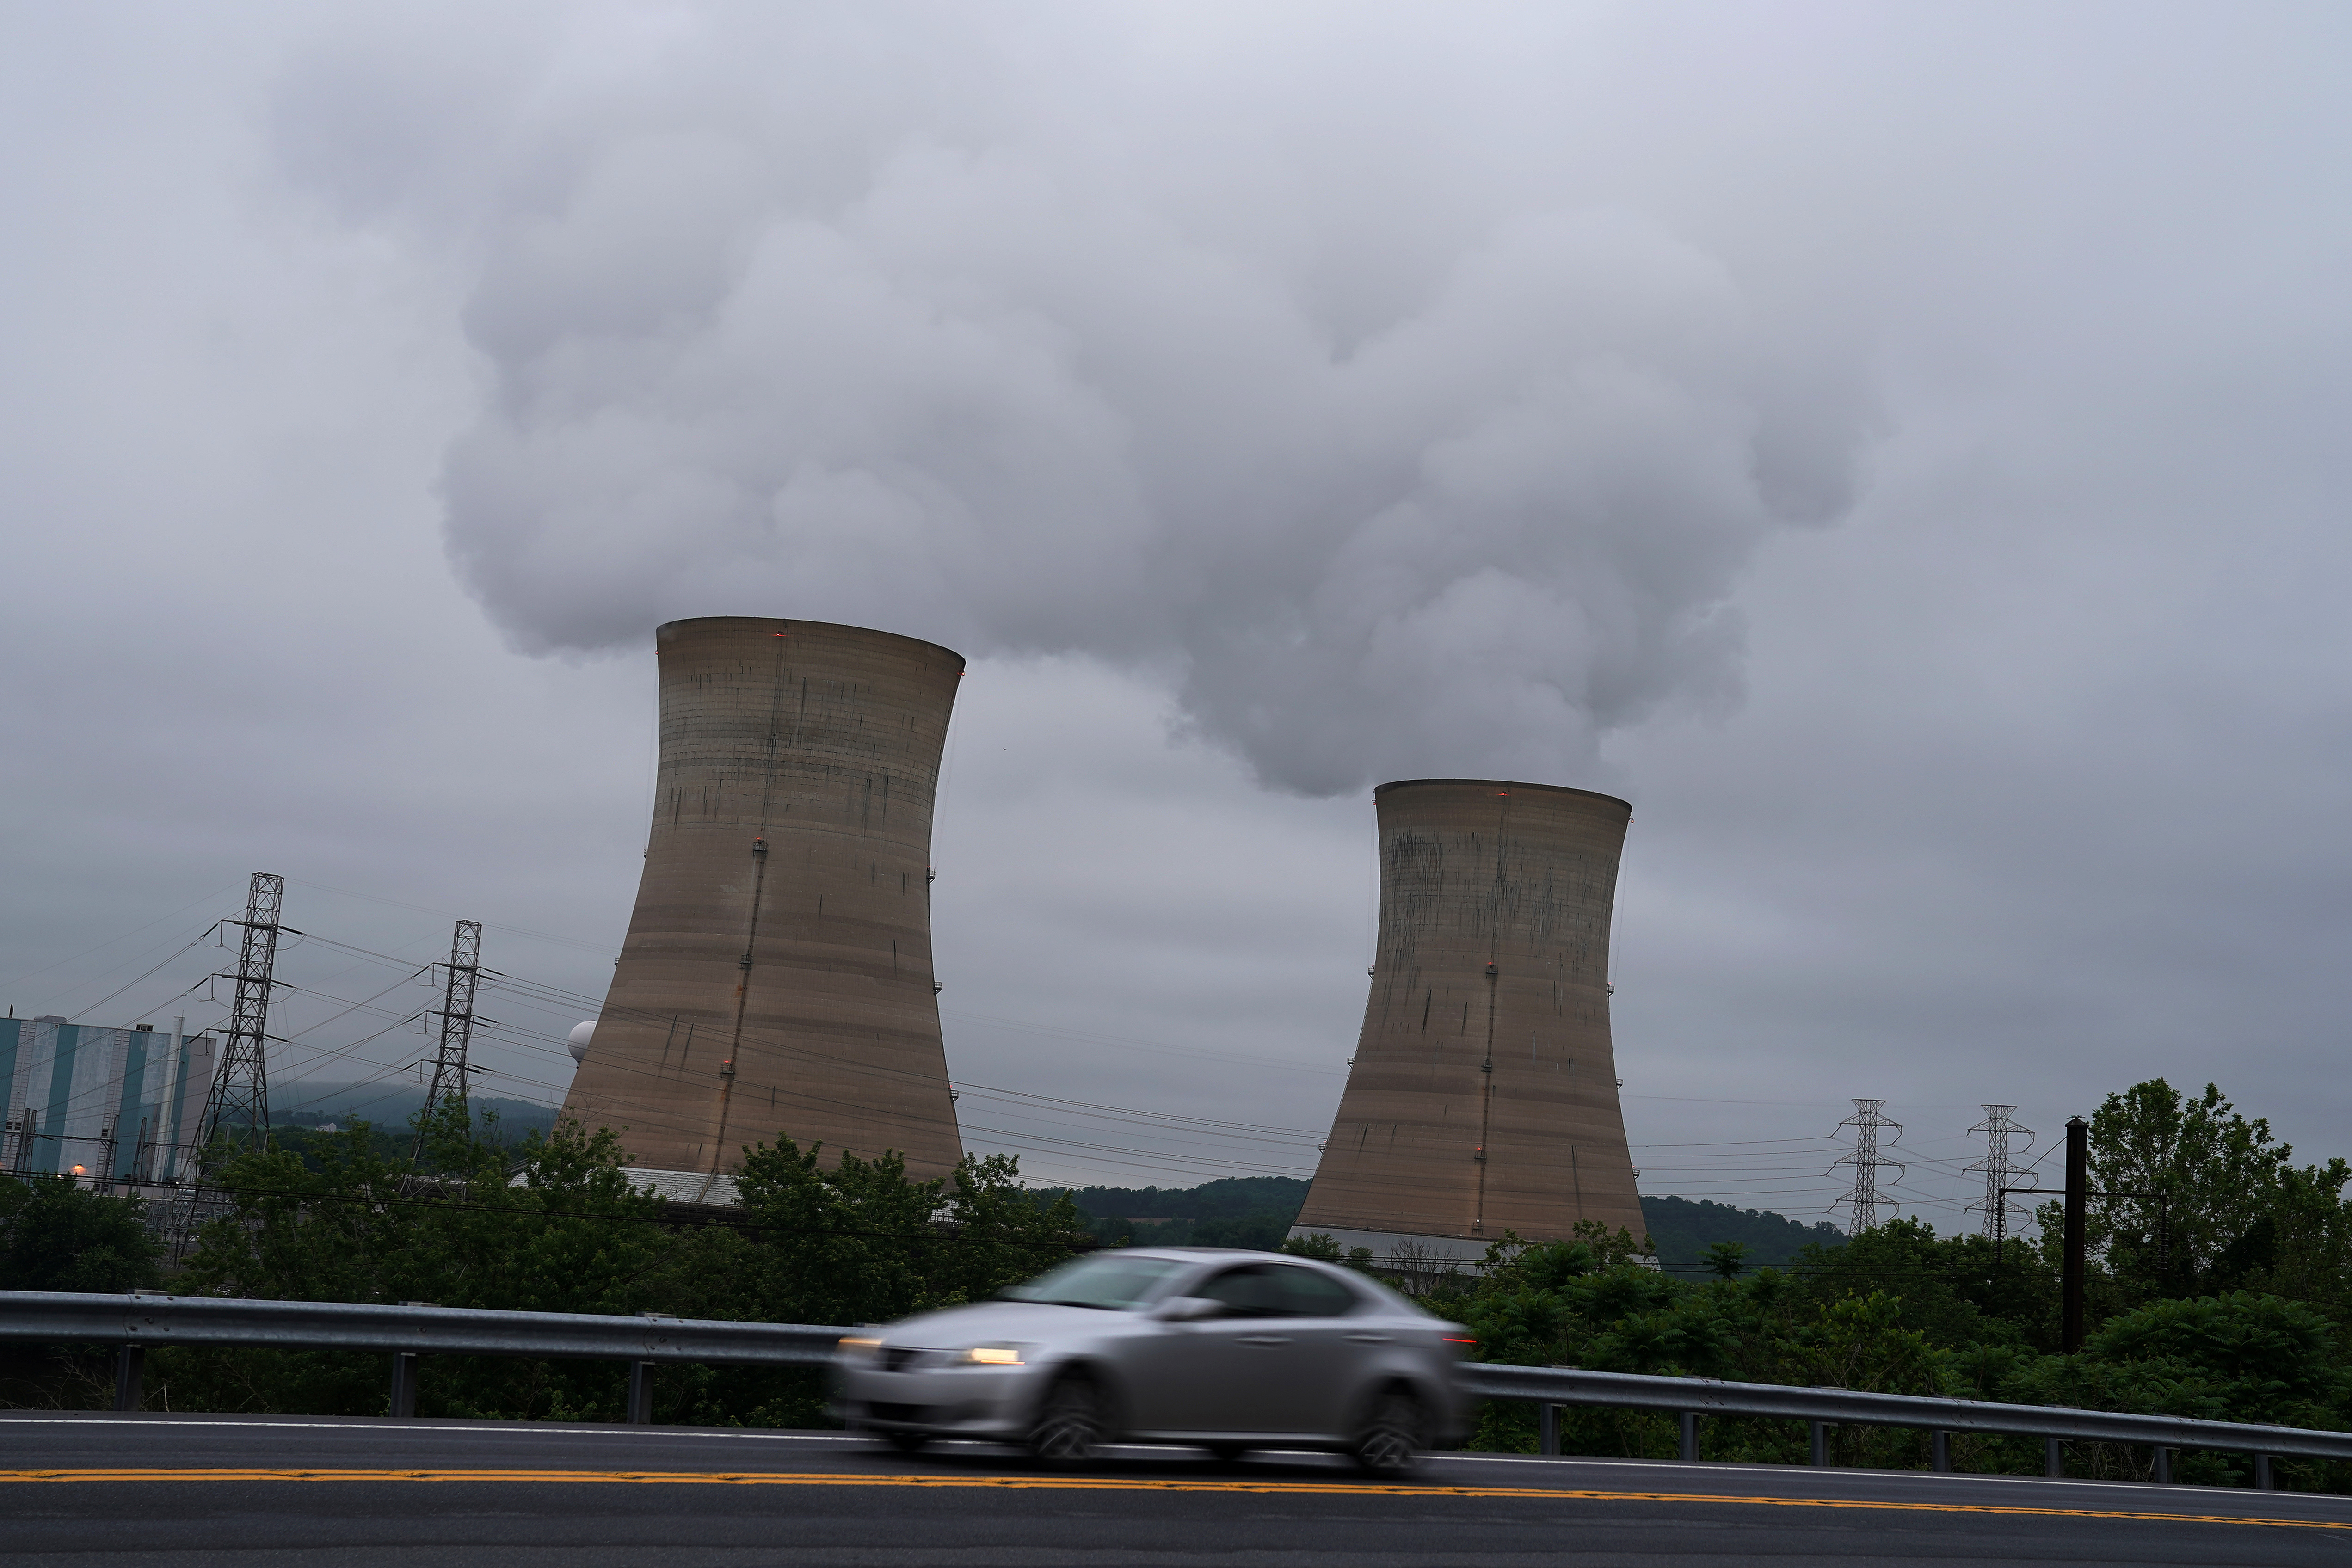 The Three Mile Island Nuclear power plant is pictured in Dauphin County